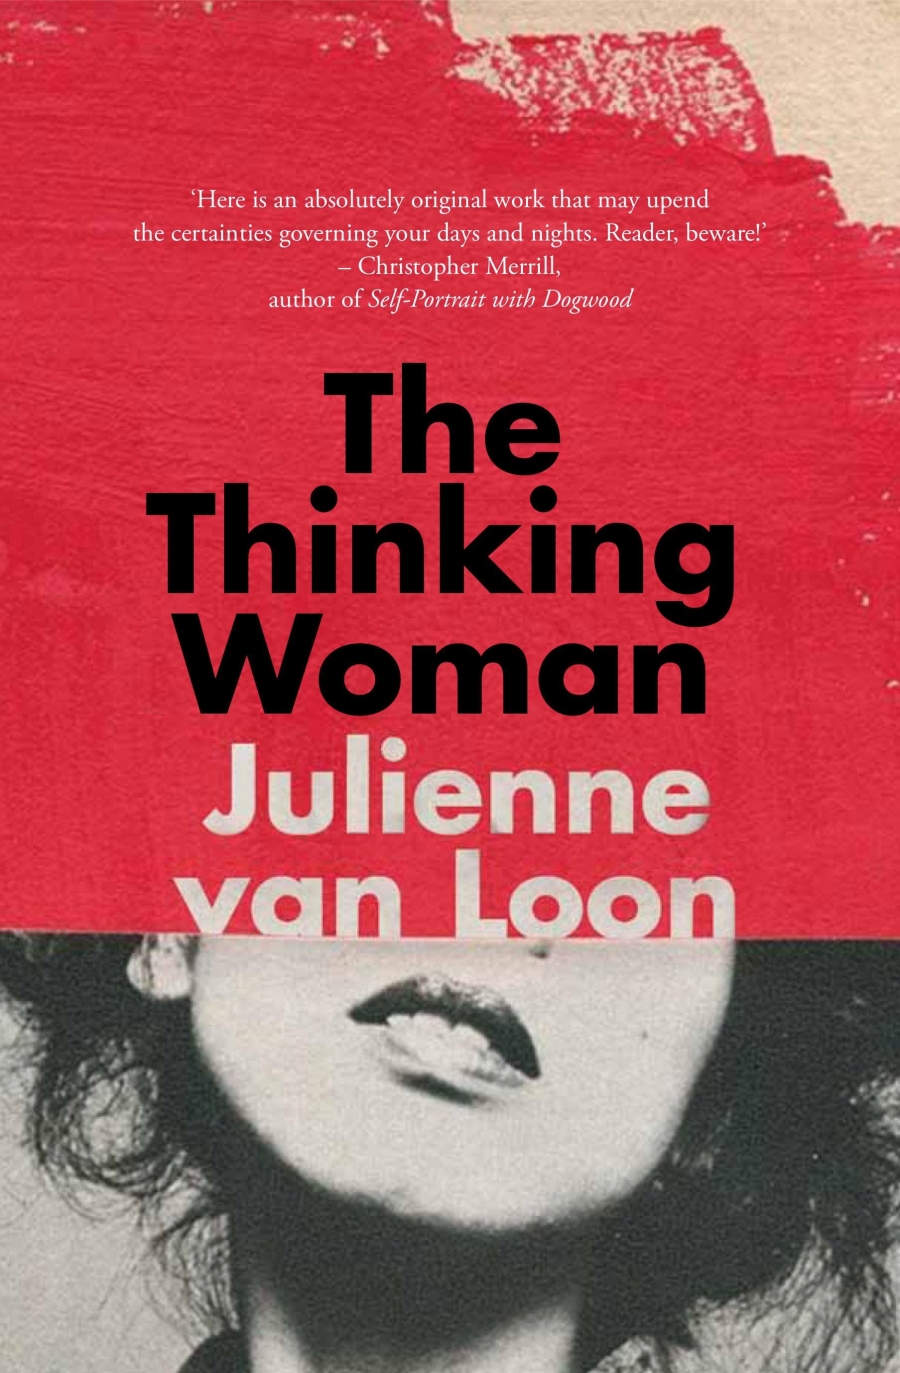 The Thinking Woman